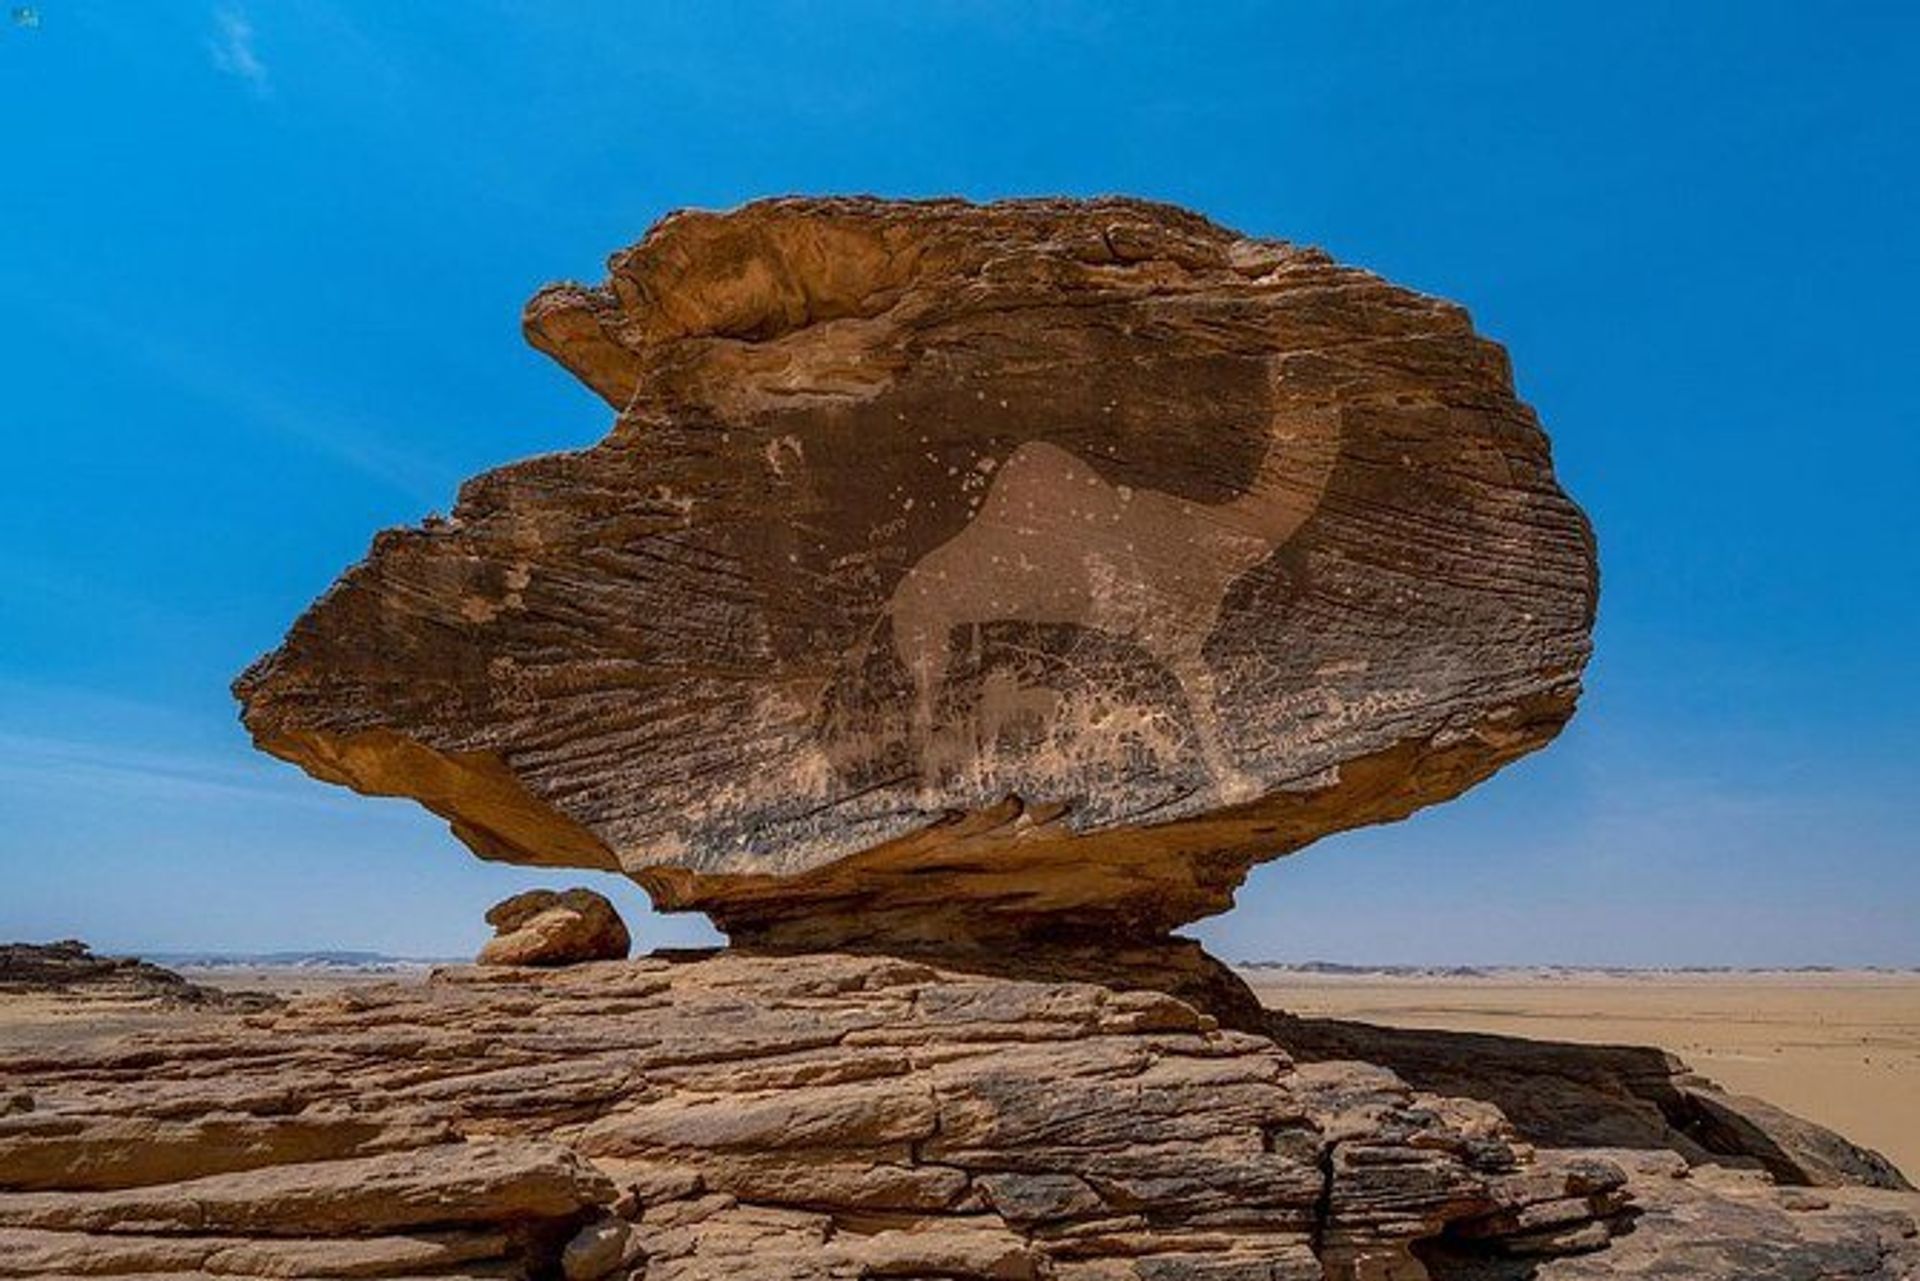 A petroglyph of a camel in Hima Photo: Flickr